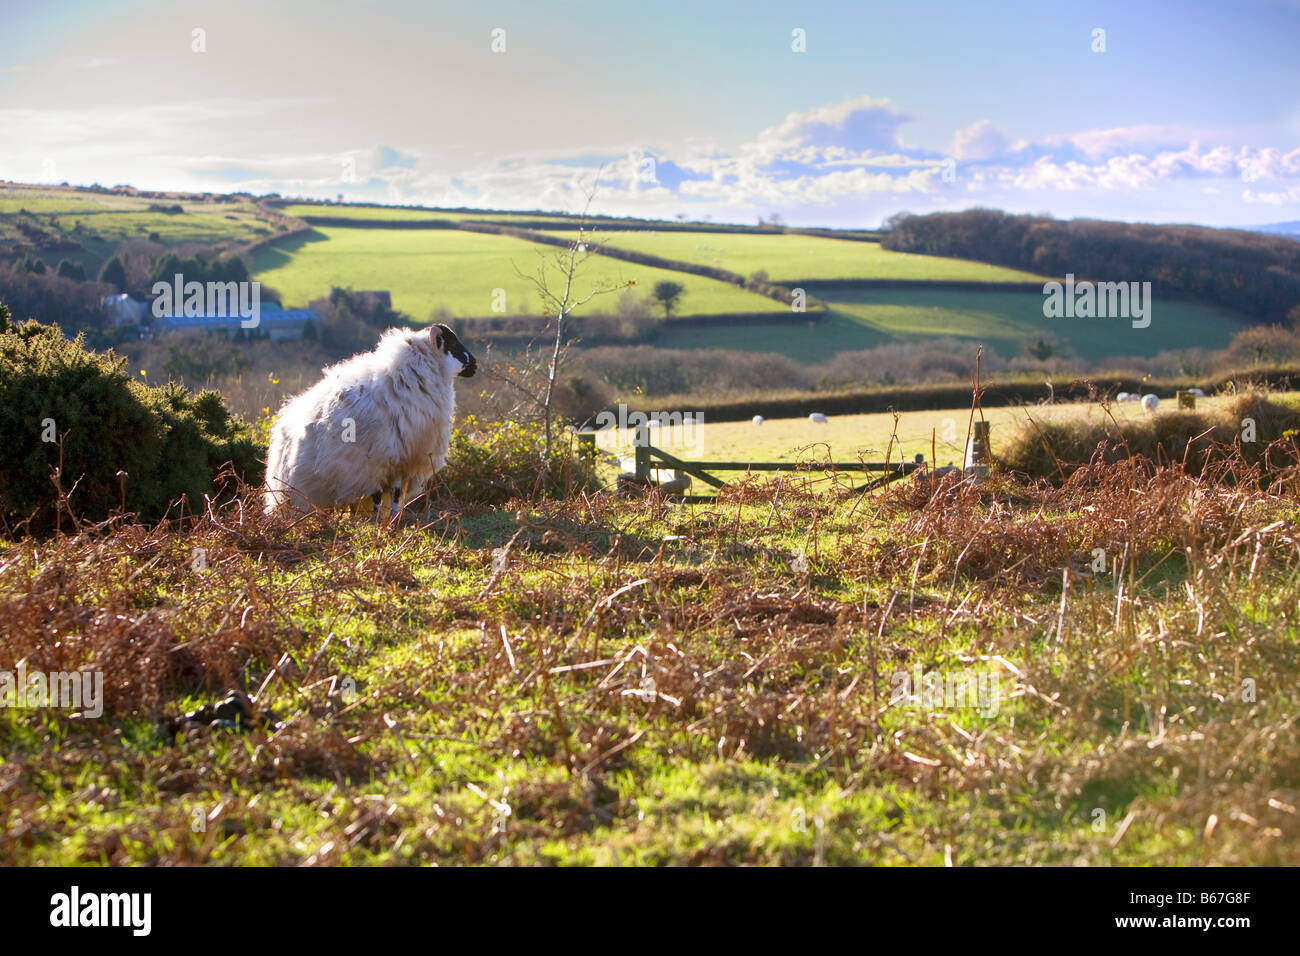 Dartmoor sheep wooly sheep on dartmoor national park looking over field and rolling countryside Stock Photo